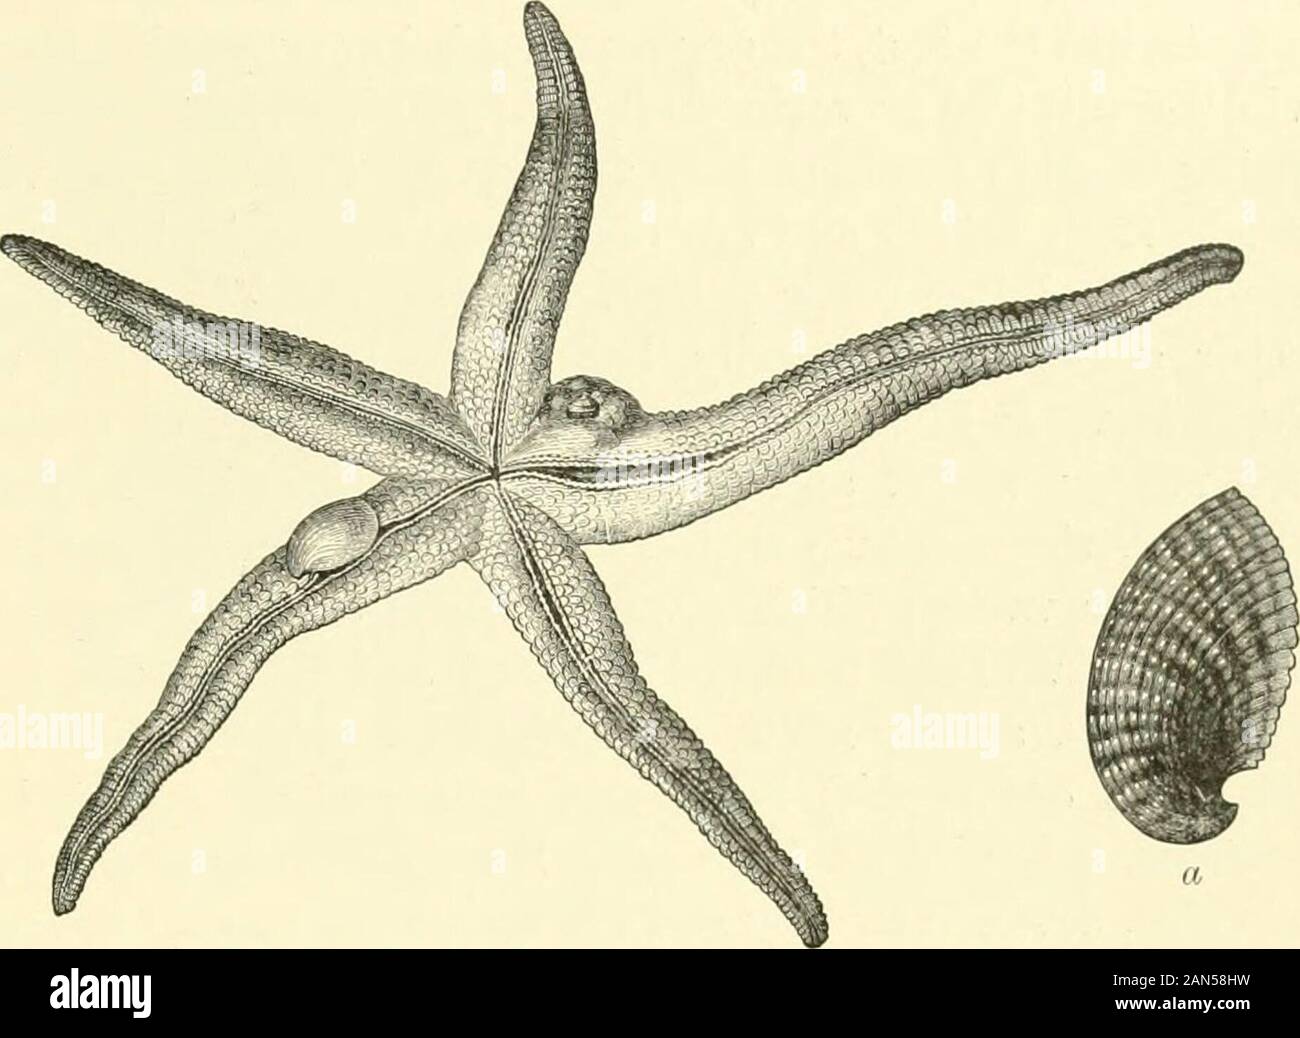 The royal natural history . ensis and Capulus hungaricus,—and a third,Crepidula fomicata, supposed to have been imported with American oysters, isbecoming an established resident on the Essex coast. Closely allied to Capulusis Tliyca crystallina, which lives parasitic upon star-fish at Mauritius and inother parts of the Indian Ocean. In the family Xenophoridai are contained aremarkable group of molluscs known as carrier-shells, so-called from the instinctivehabit some of them possess of carrying about with them shells, stones, and othersubstances, which they cement to the exterior of their own Stock Photo